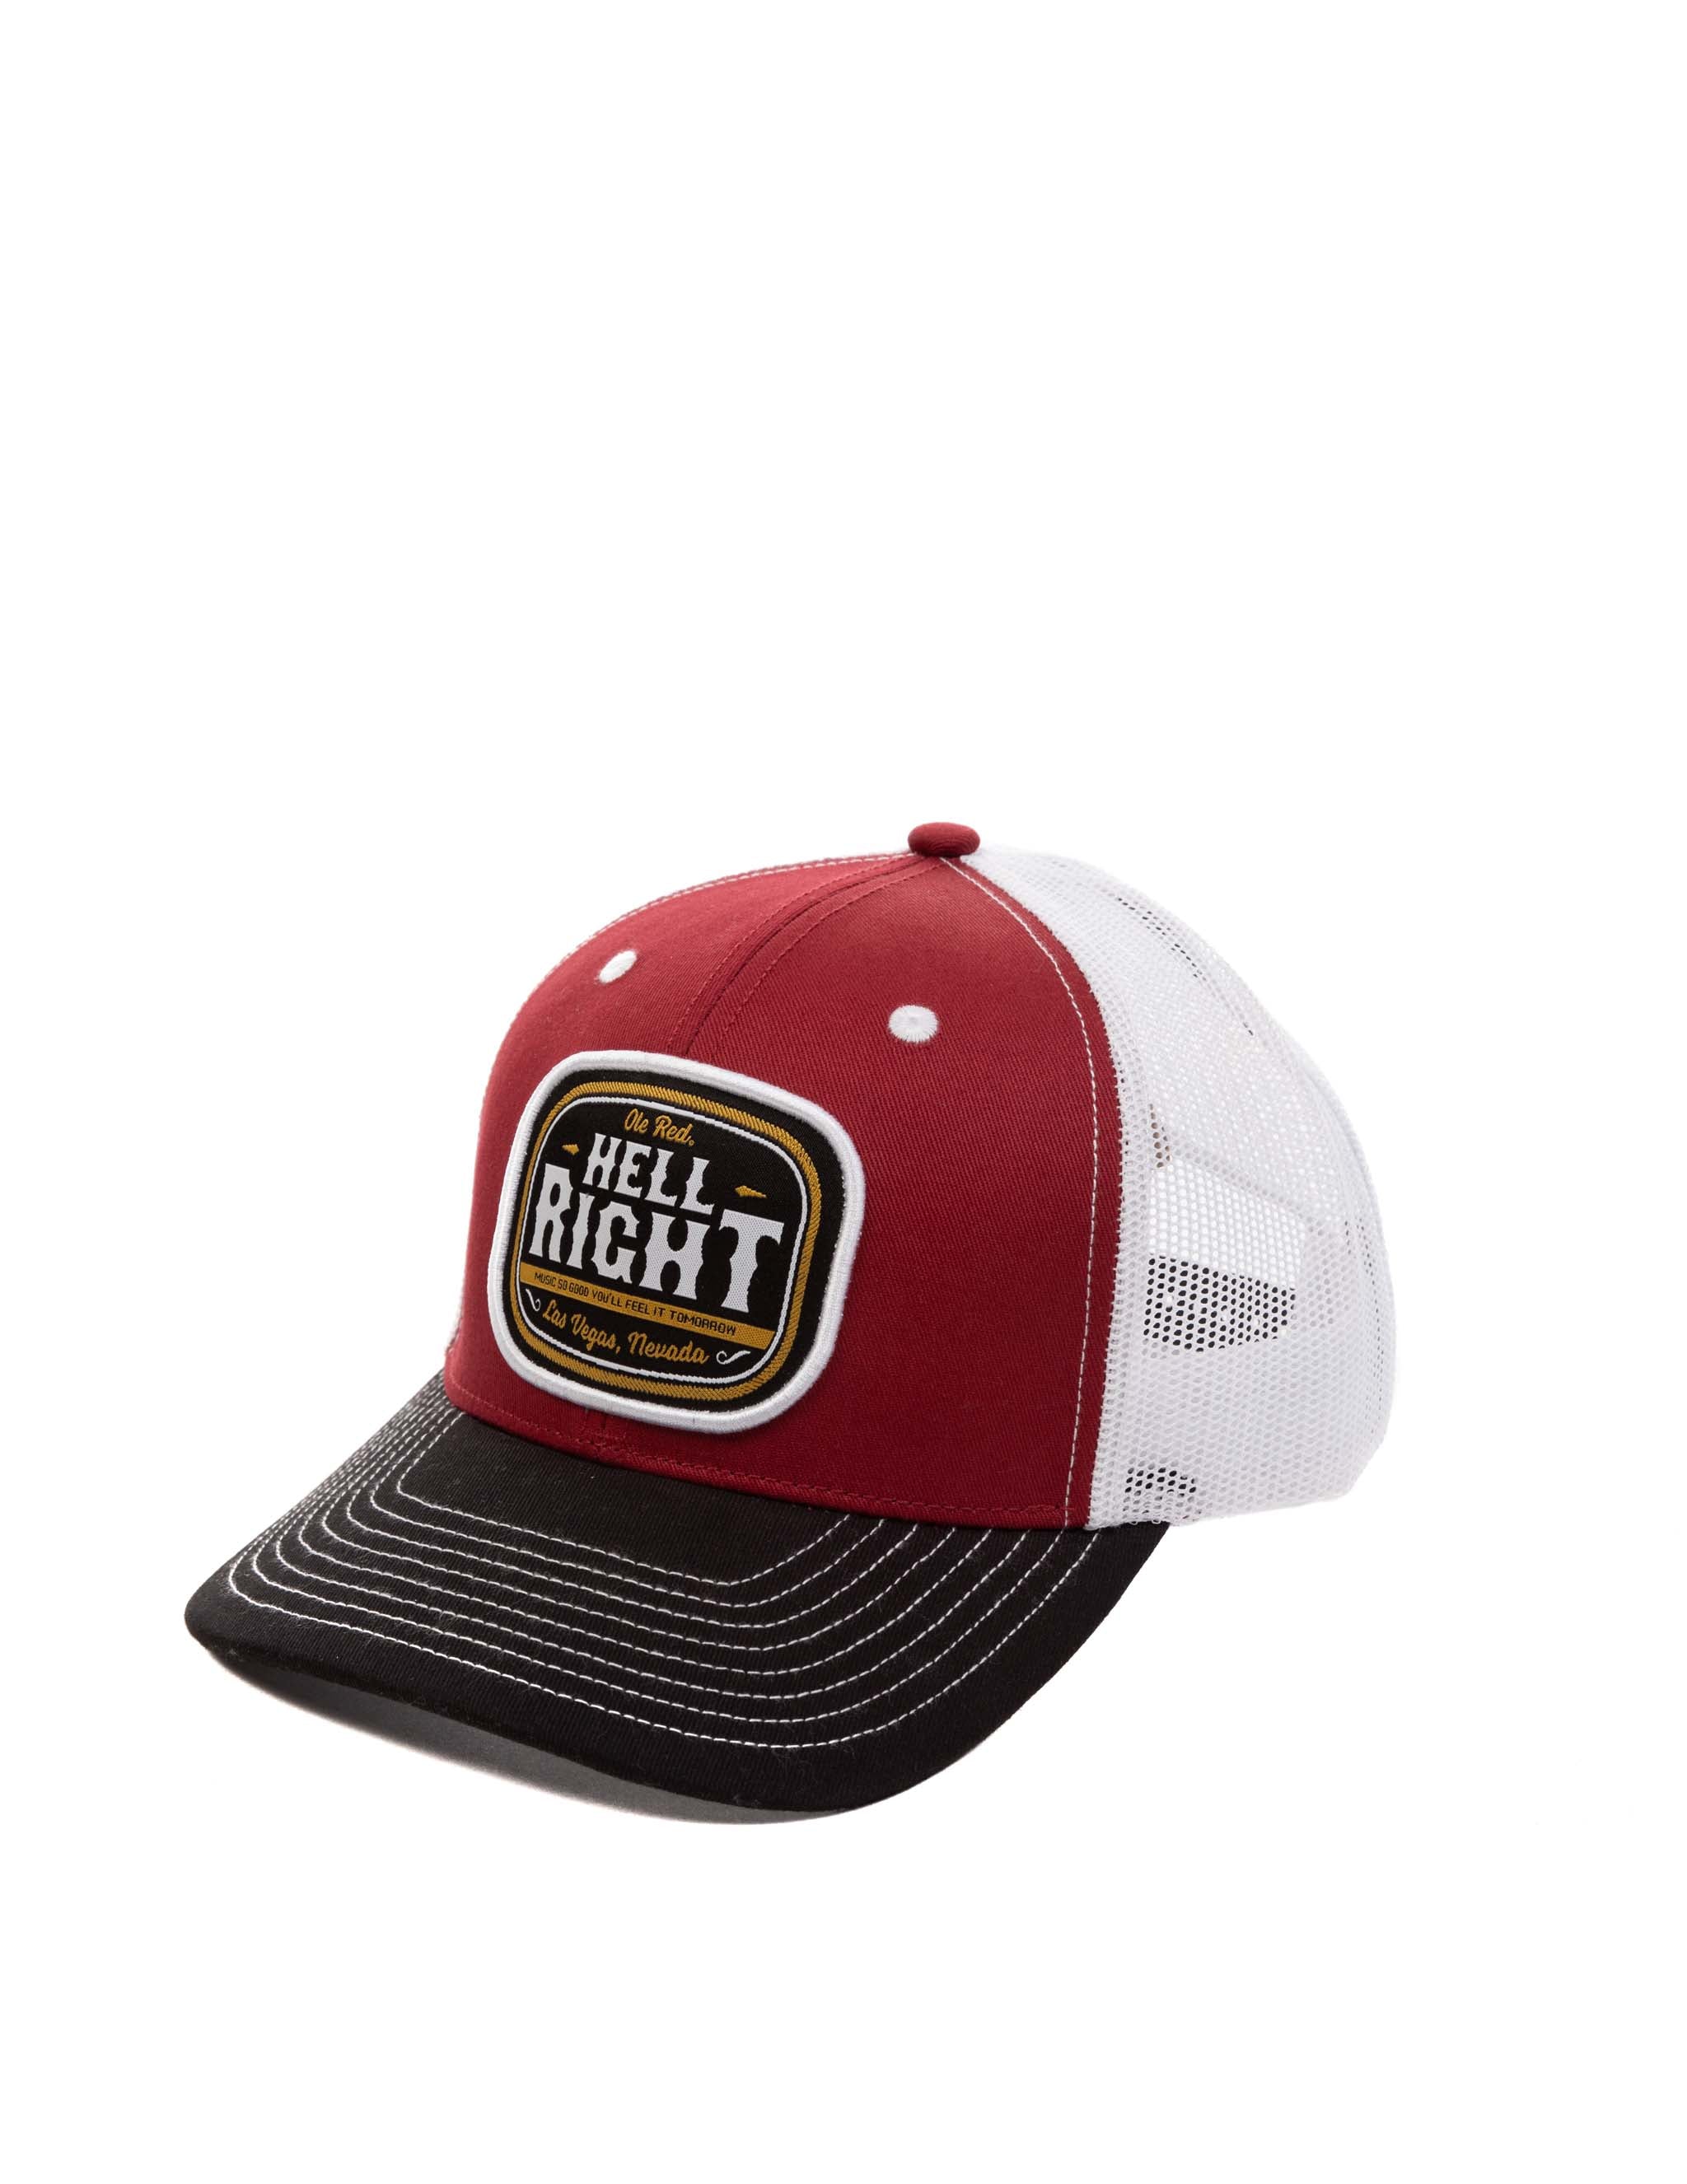 Patch Trucker Hat - Ice Cold Country Music